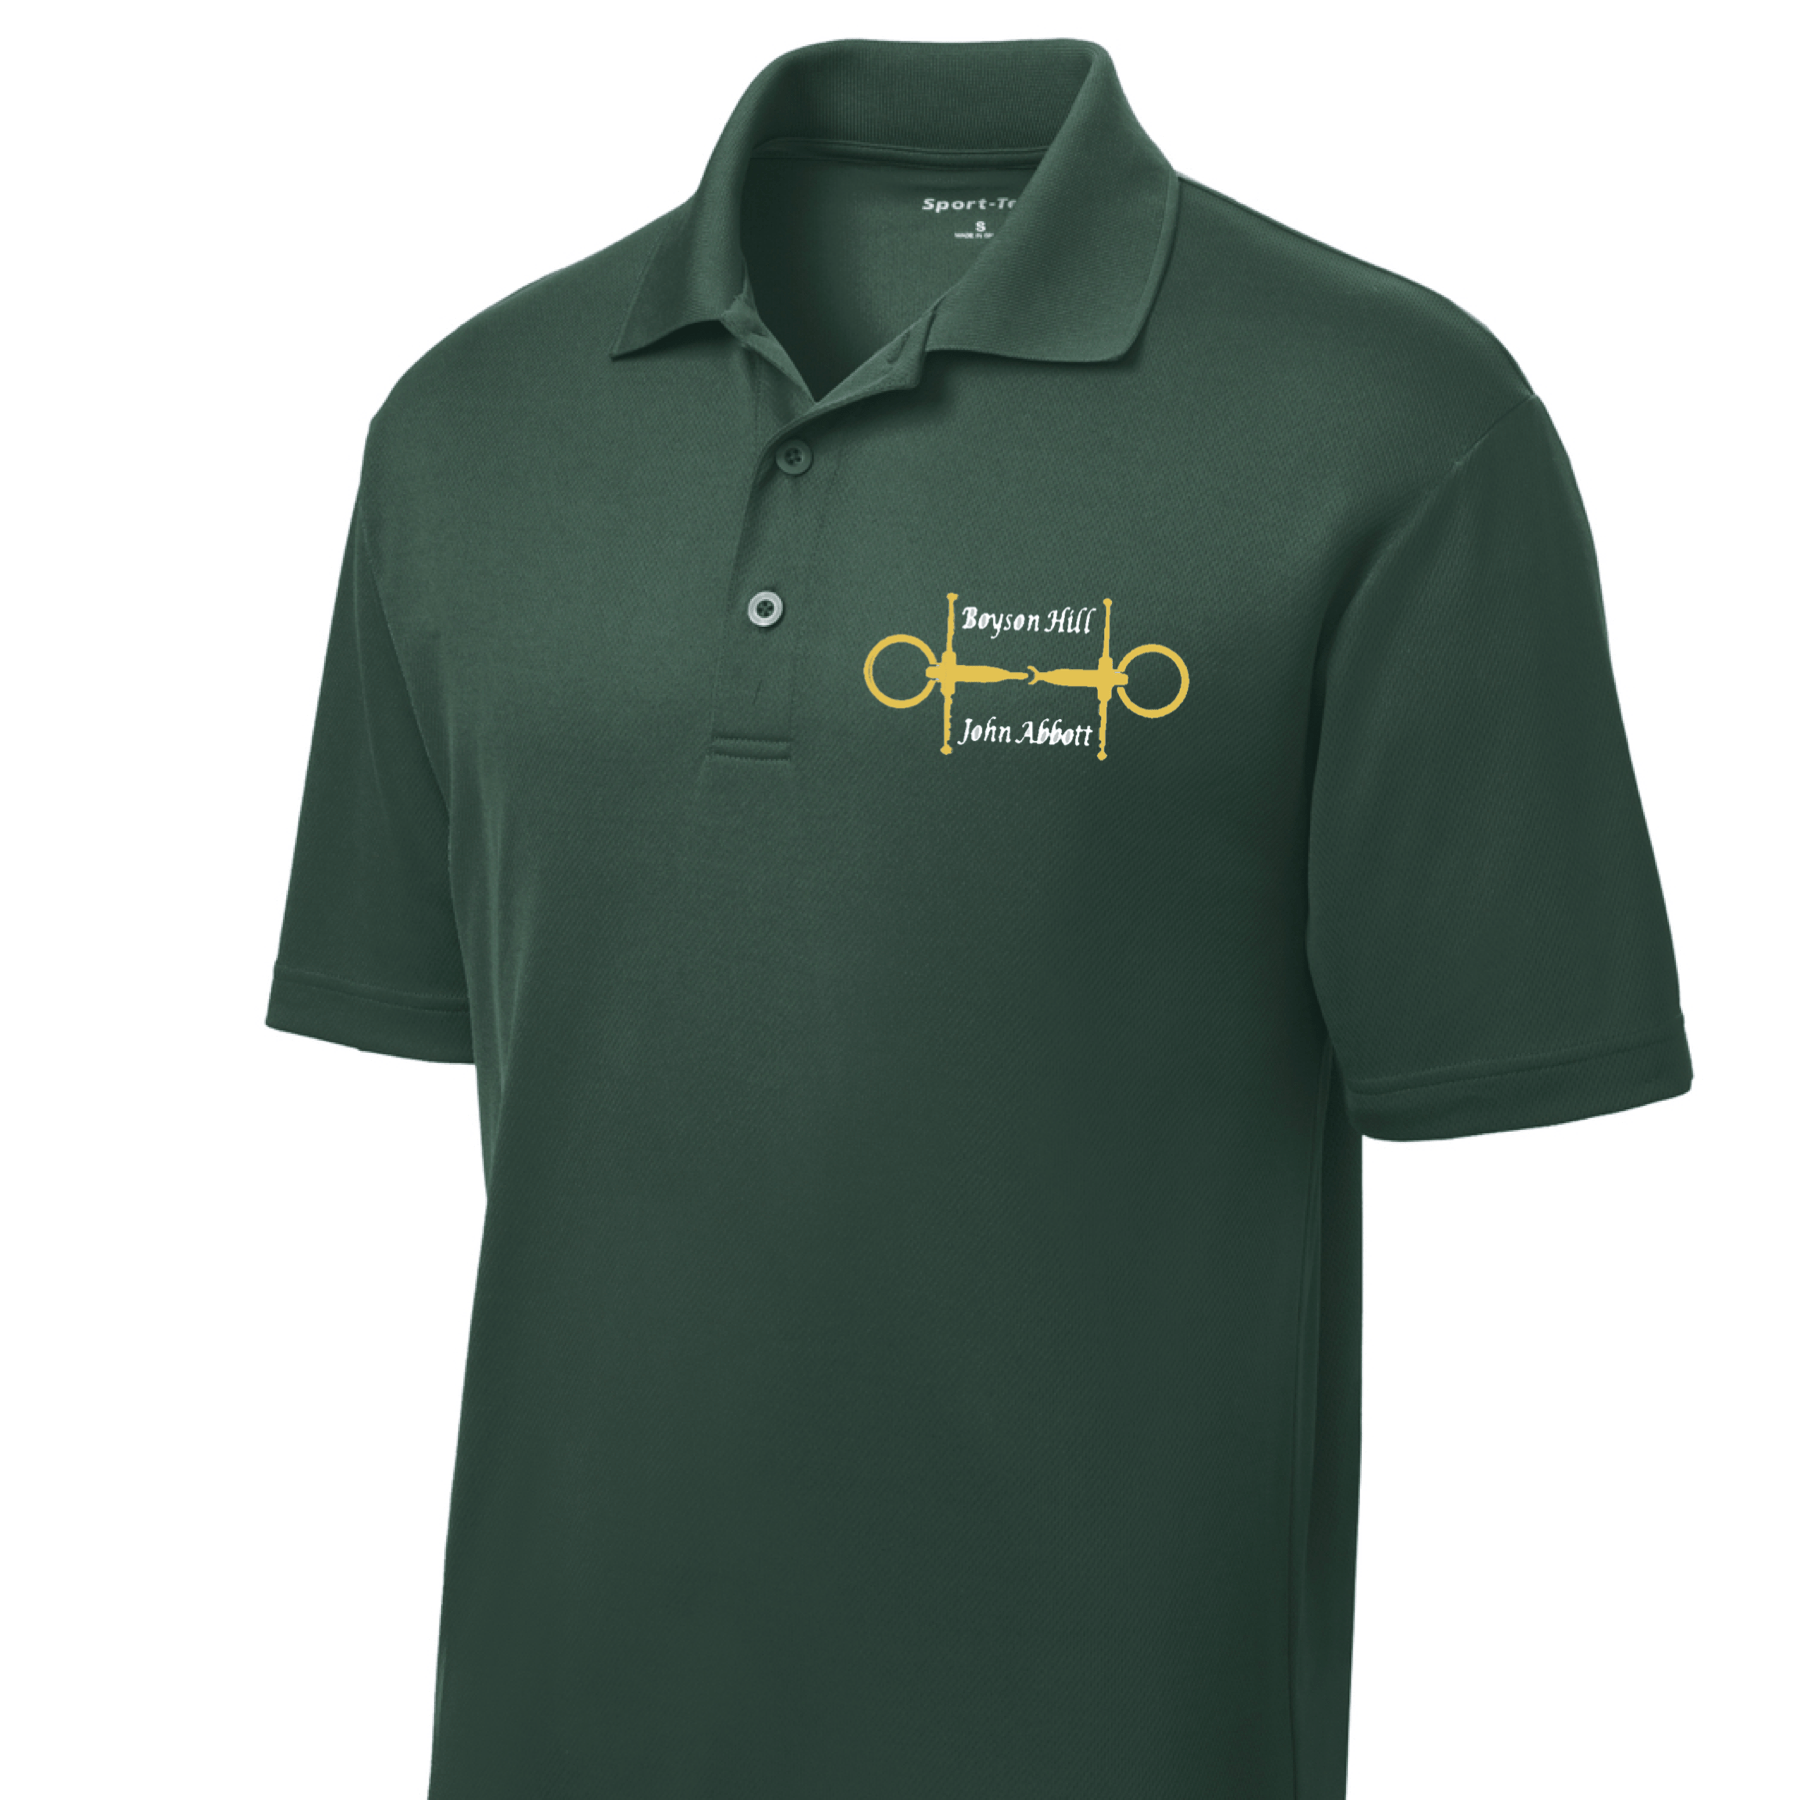 Equestrian Team Apparel Custom Team Shirts Boyson Hill Polo Shirts - Men's equestrian team apparel online tack store mobile tack store custom farm apparel custom show stable clothing equestrian lifestyle horse show clothing riding clothes horses equestrian tack store